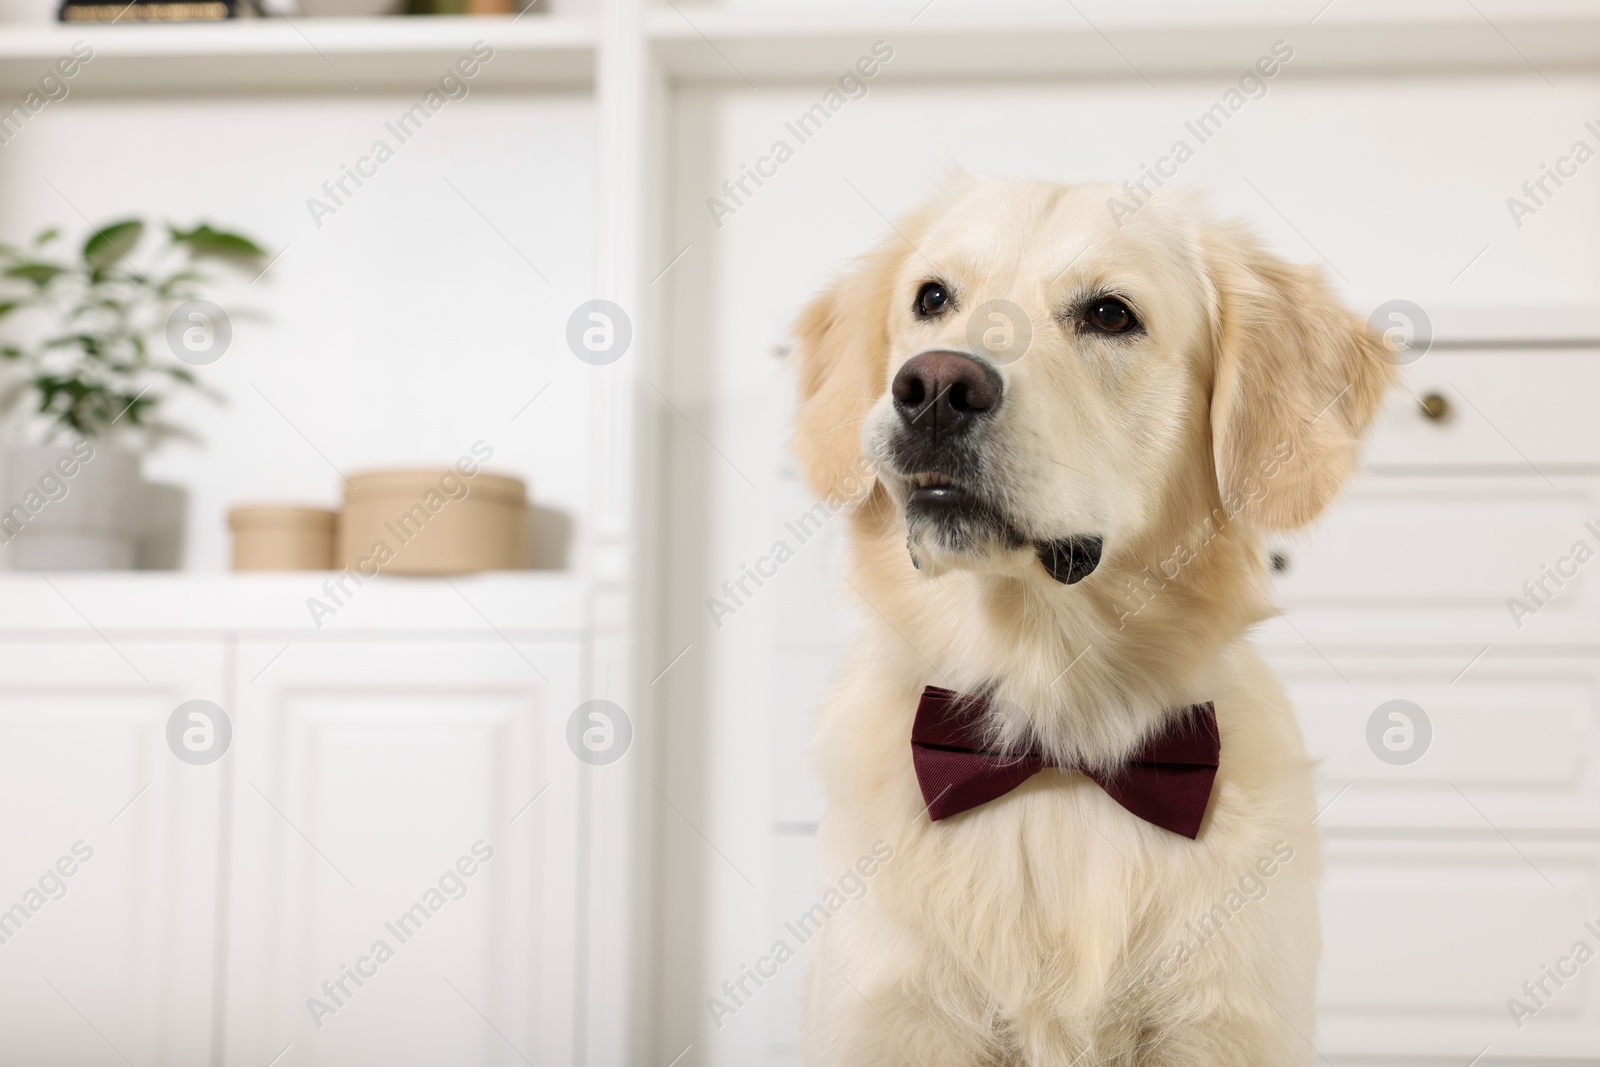 Photo of Cute Labrador Retriever with stylish bow tie indoors. Space for text